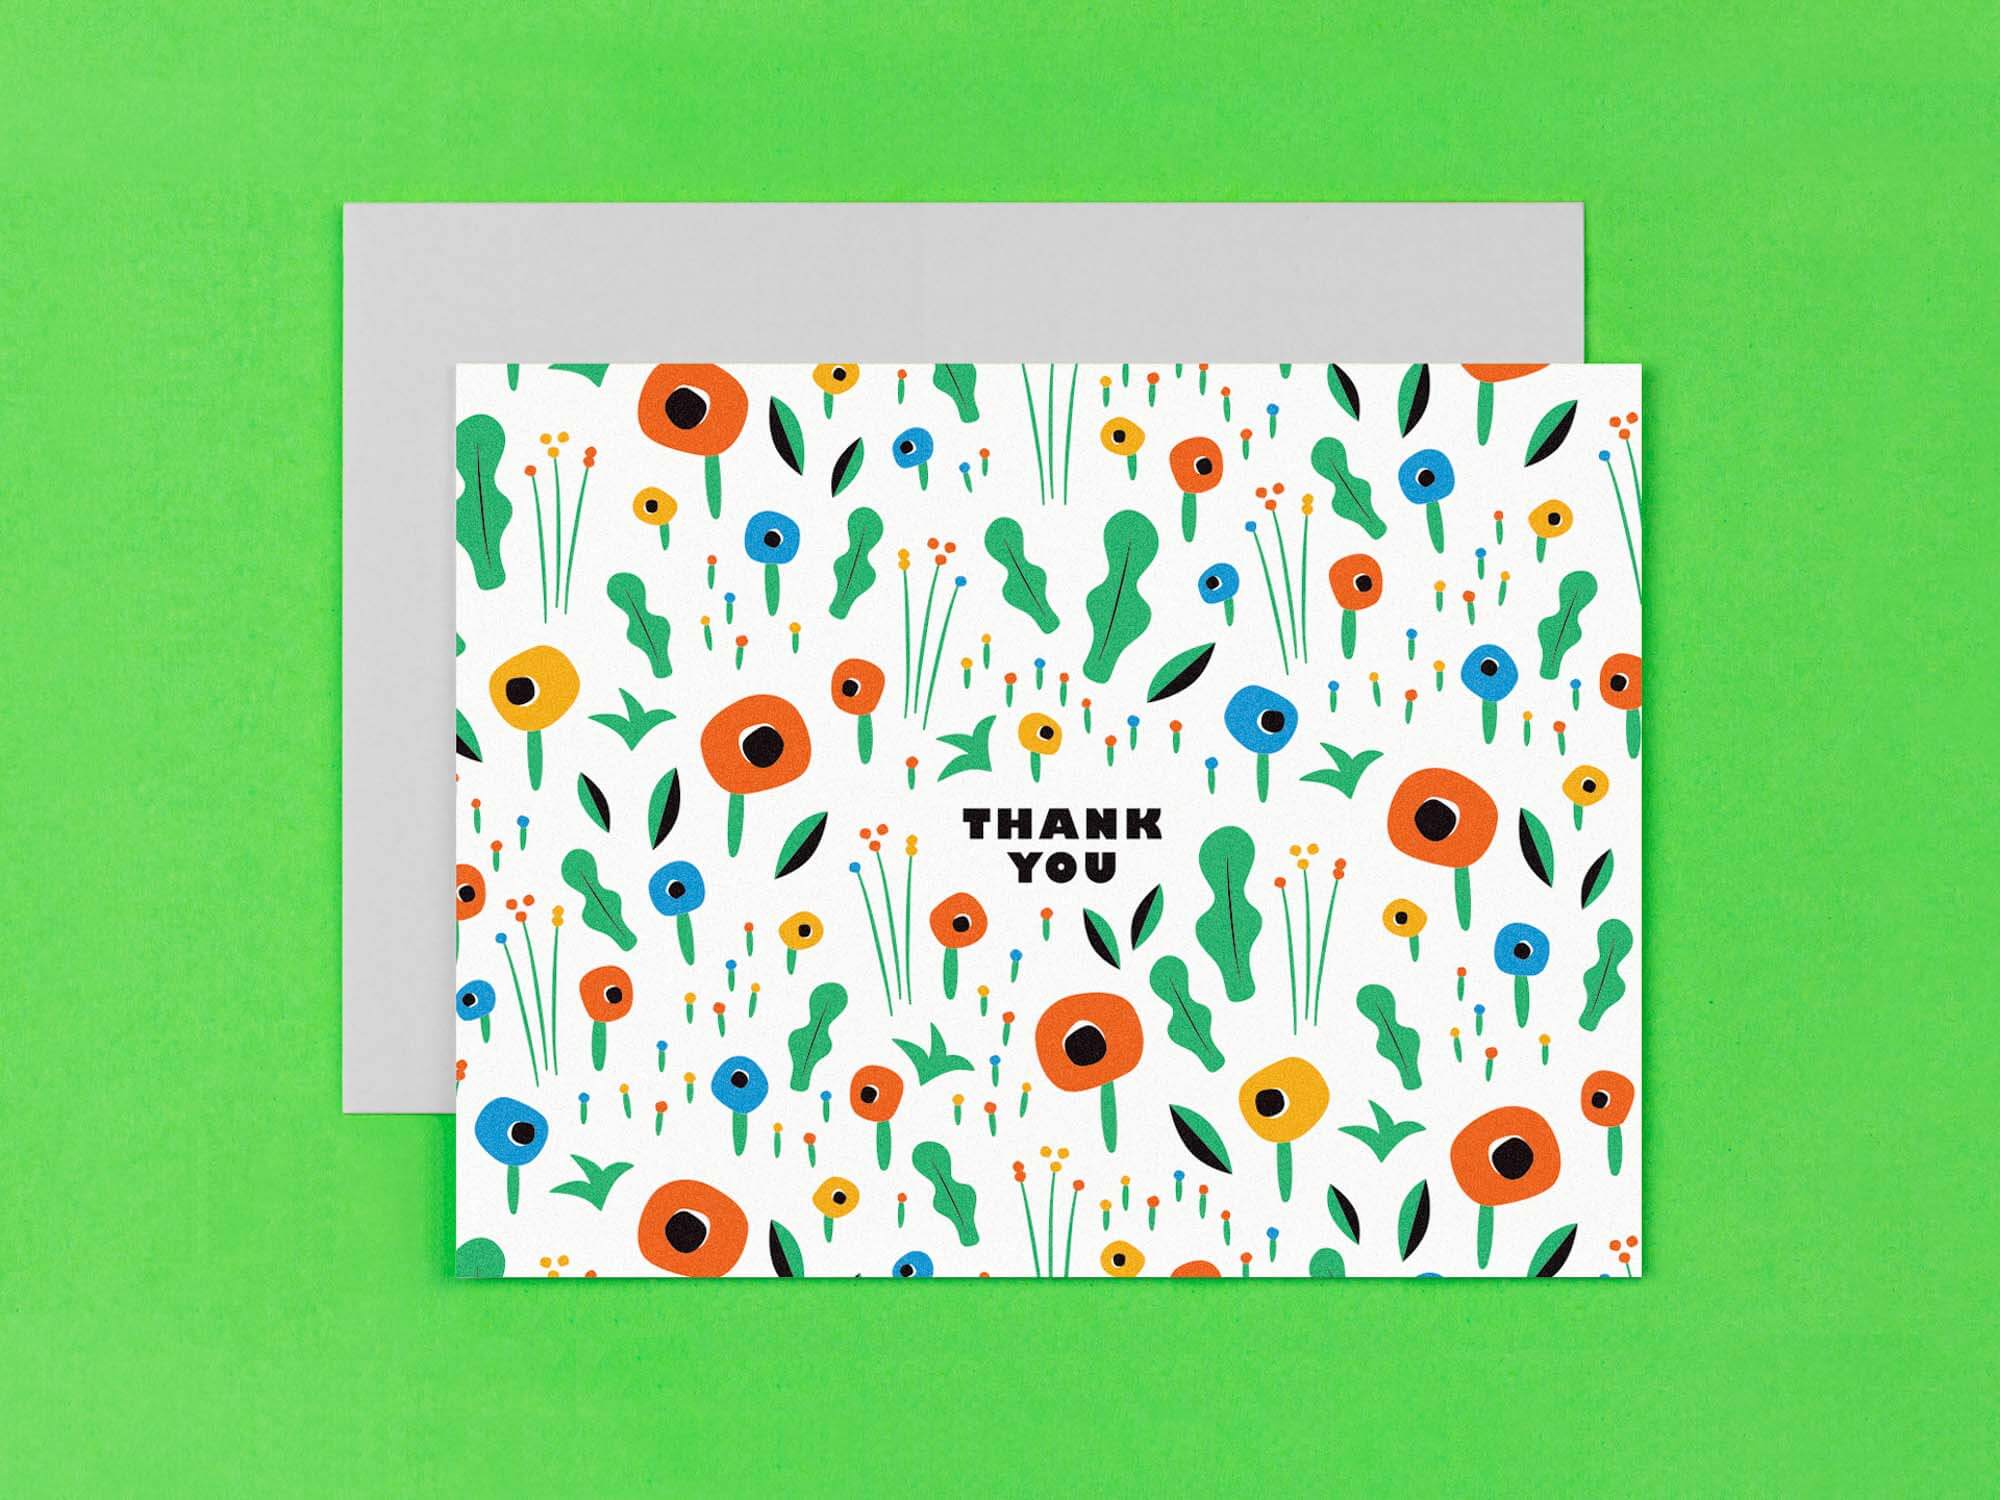 Field of poppies floral pattern thank you card with vaguely mid-century inspired illustration. Made in USA by My Darlin' @mydarlin_bk